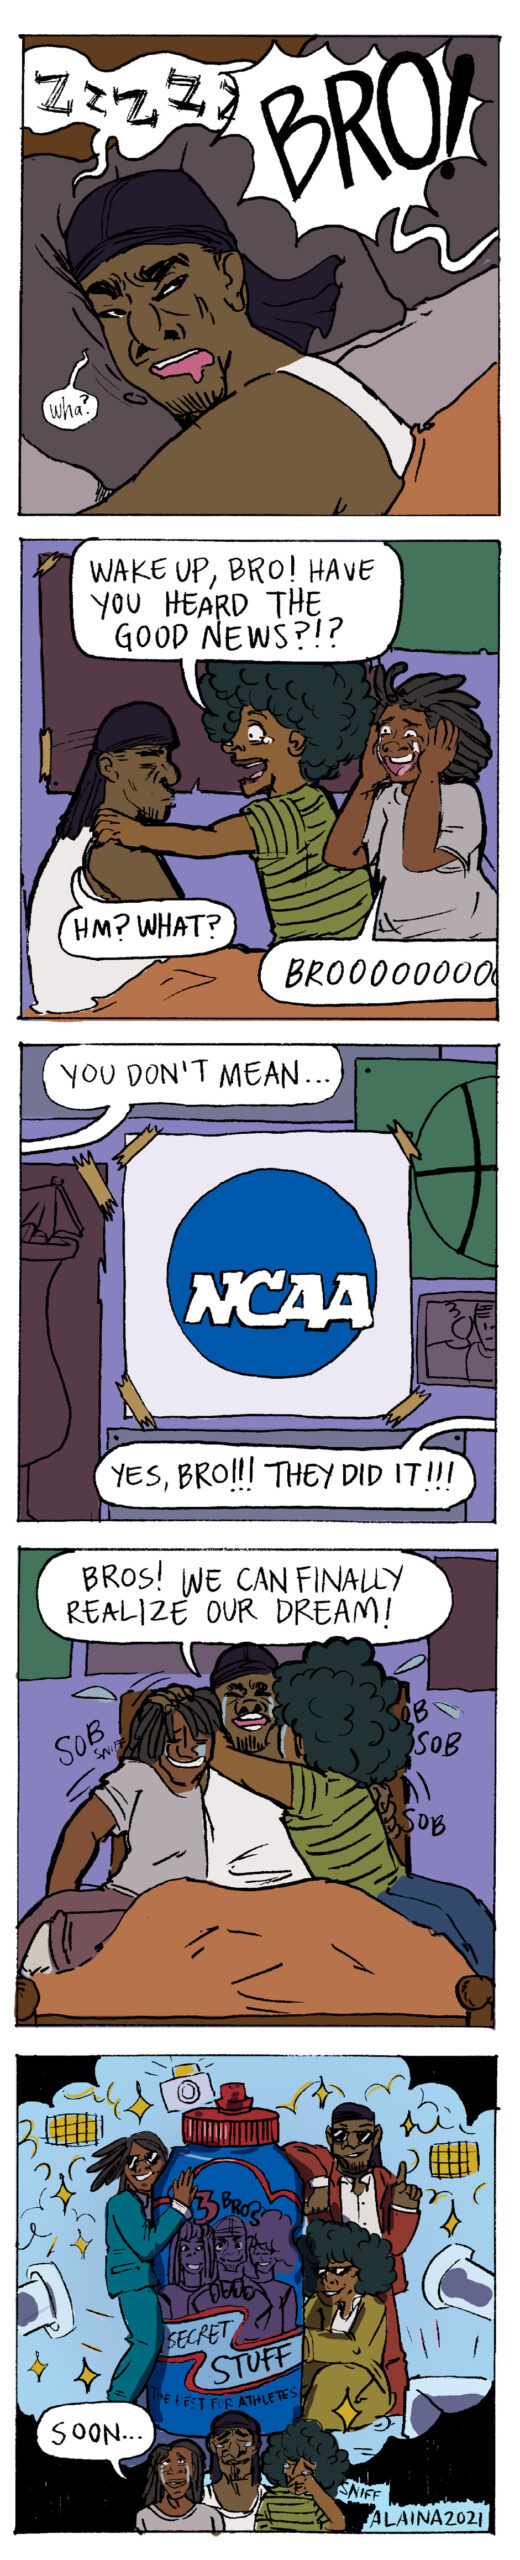 A cartoon about 3 college athletes who are now legally allowed to market their names, images, and likenesses to promote their own sports beverage.